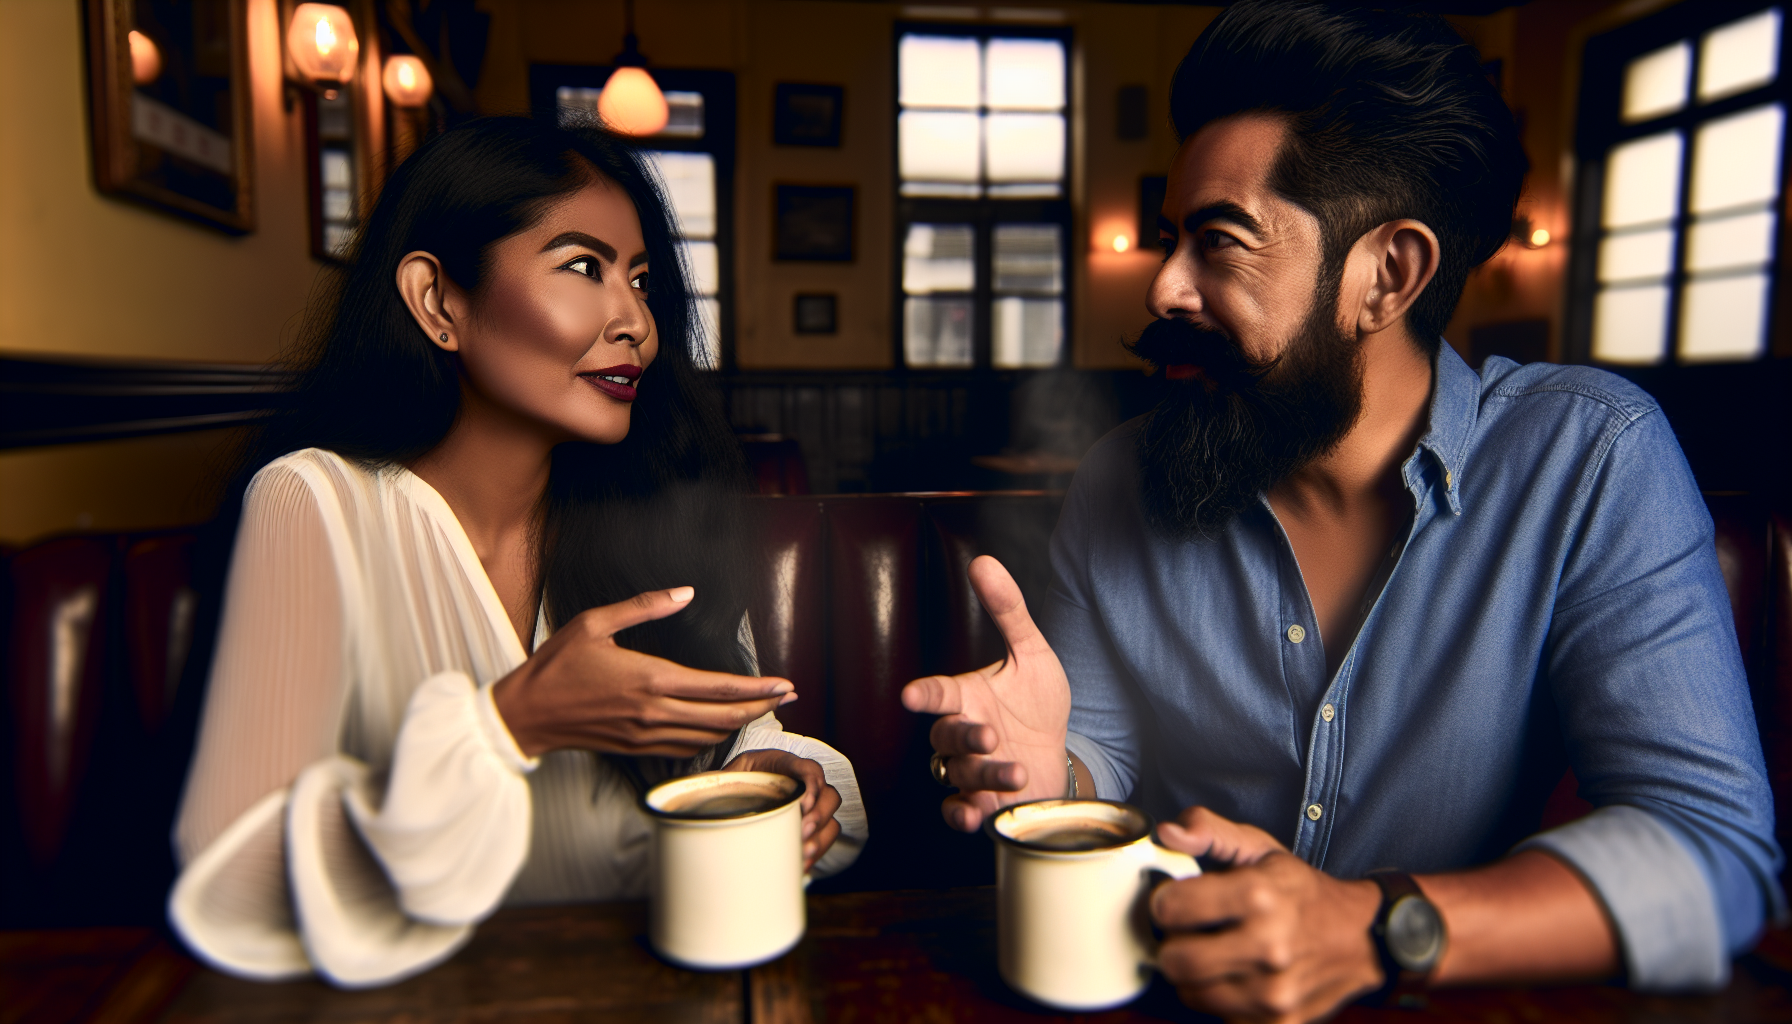 A couple having a meaningful conversation over coffee